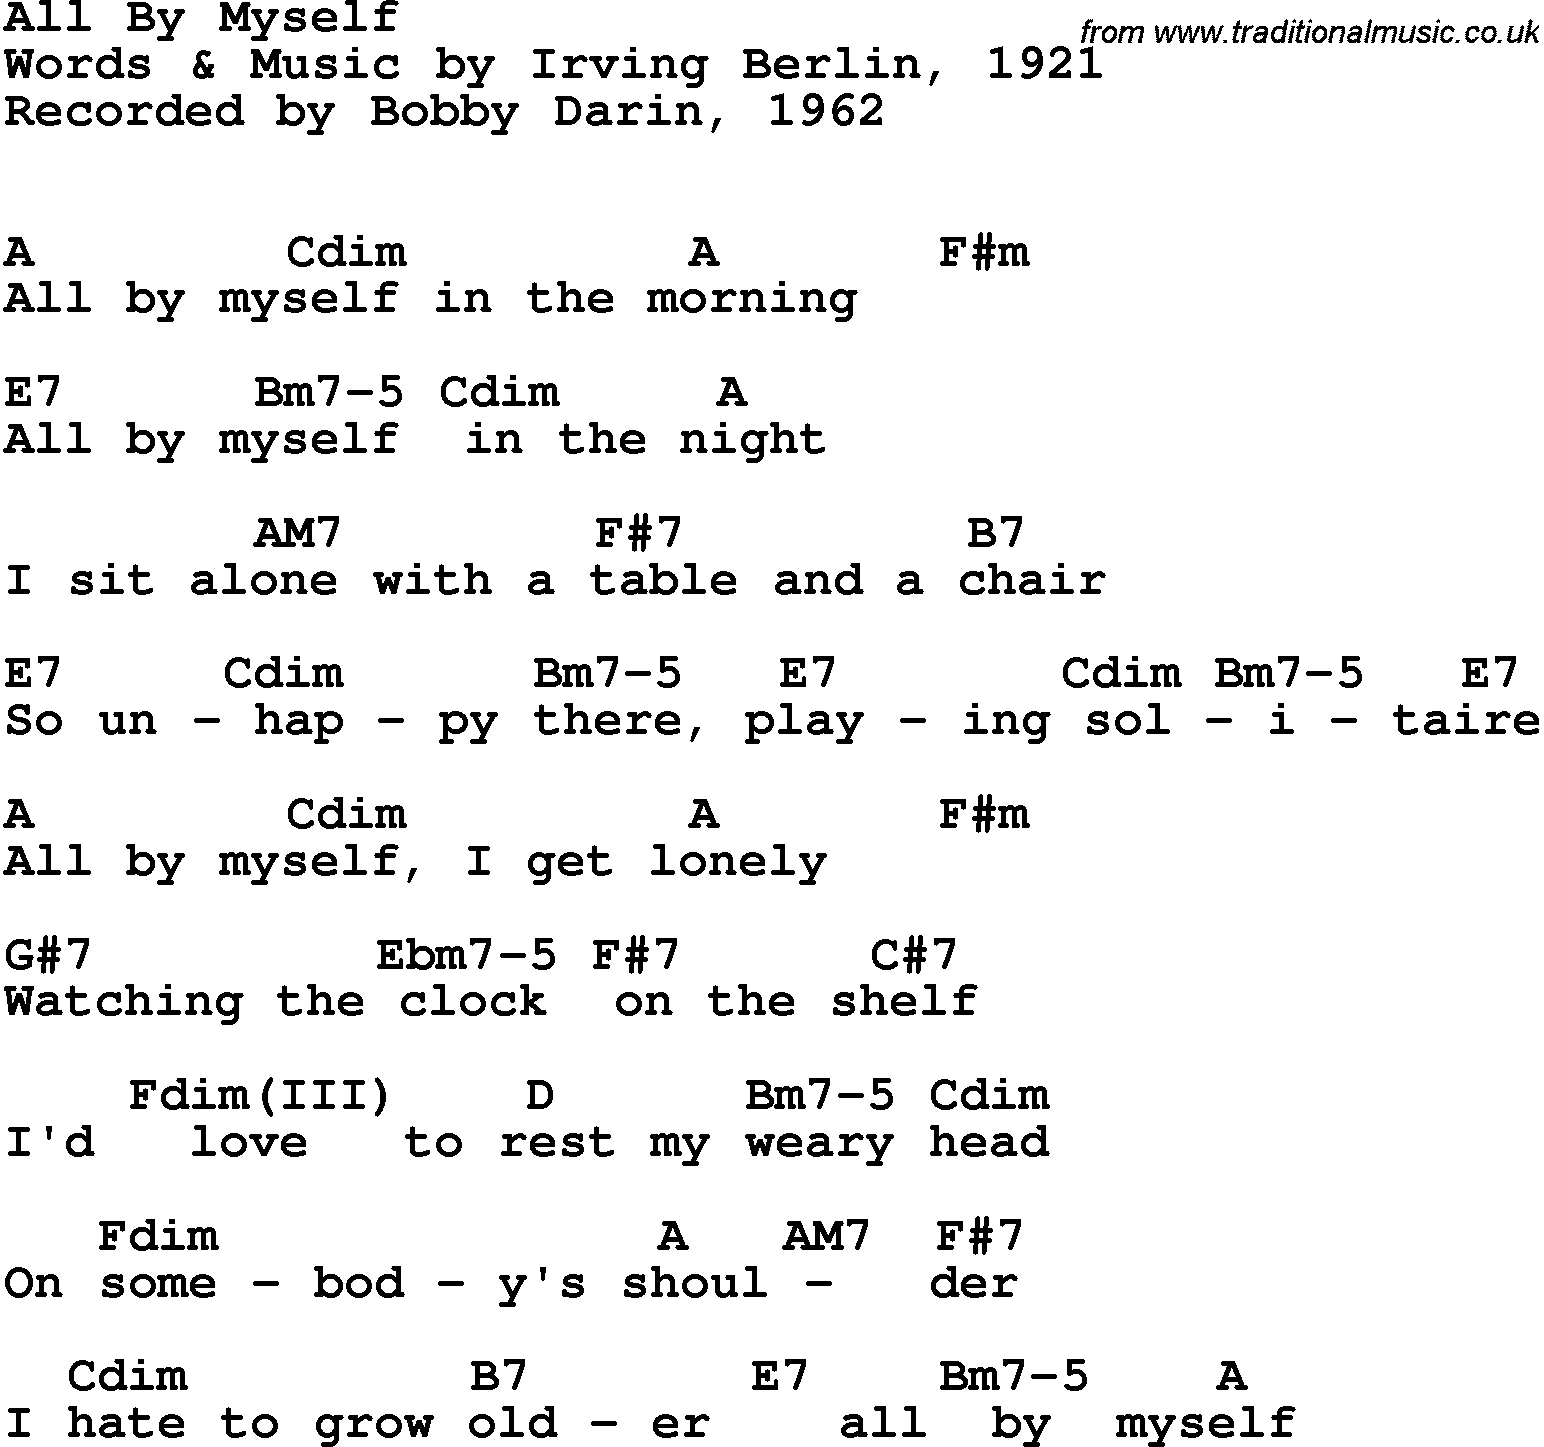 Song Lyrics with guitar chords for All By Myself - Bobby Darin, 1962